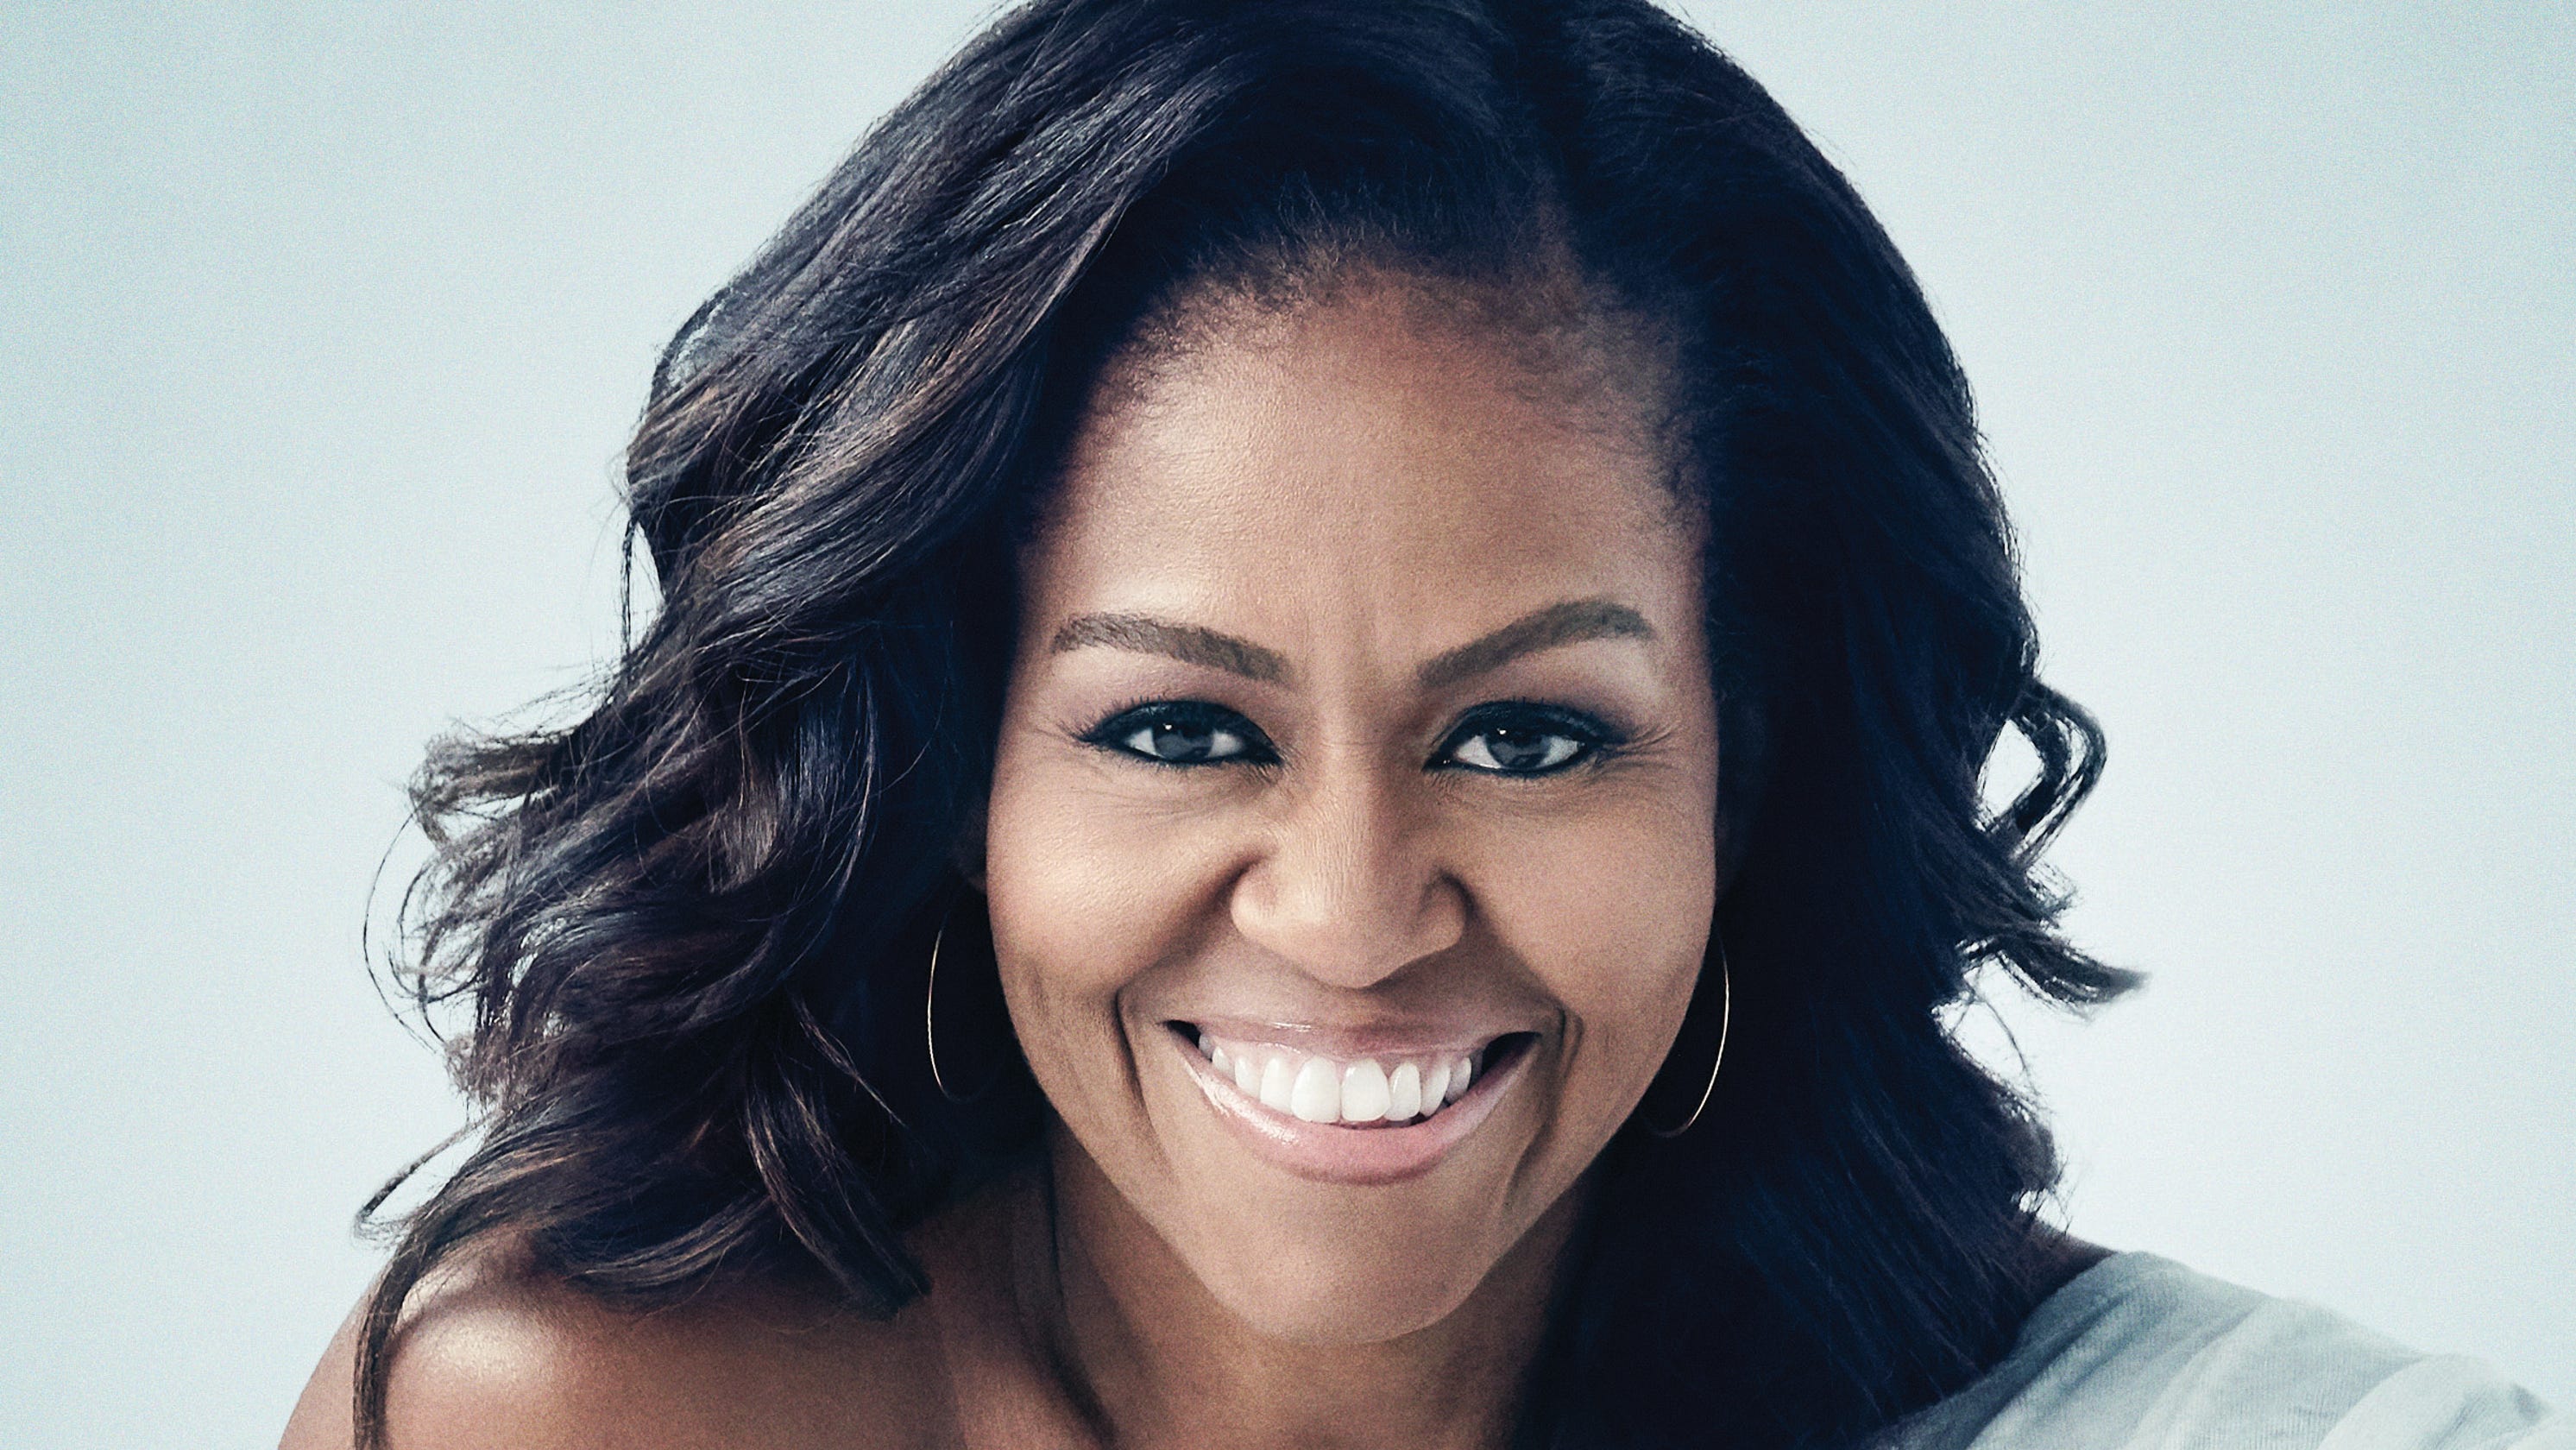 Michelle Obama book tour reaches Florida in May for her only visit2985 x 1680